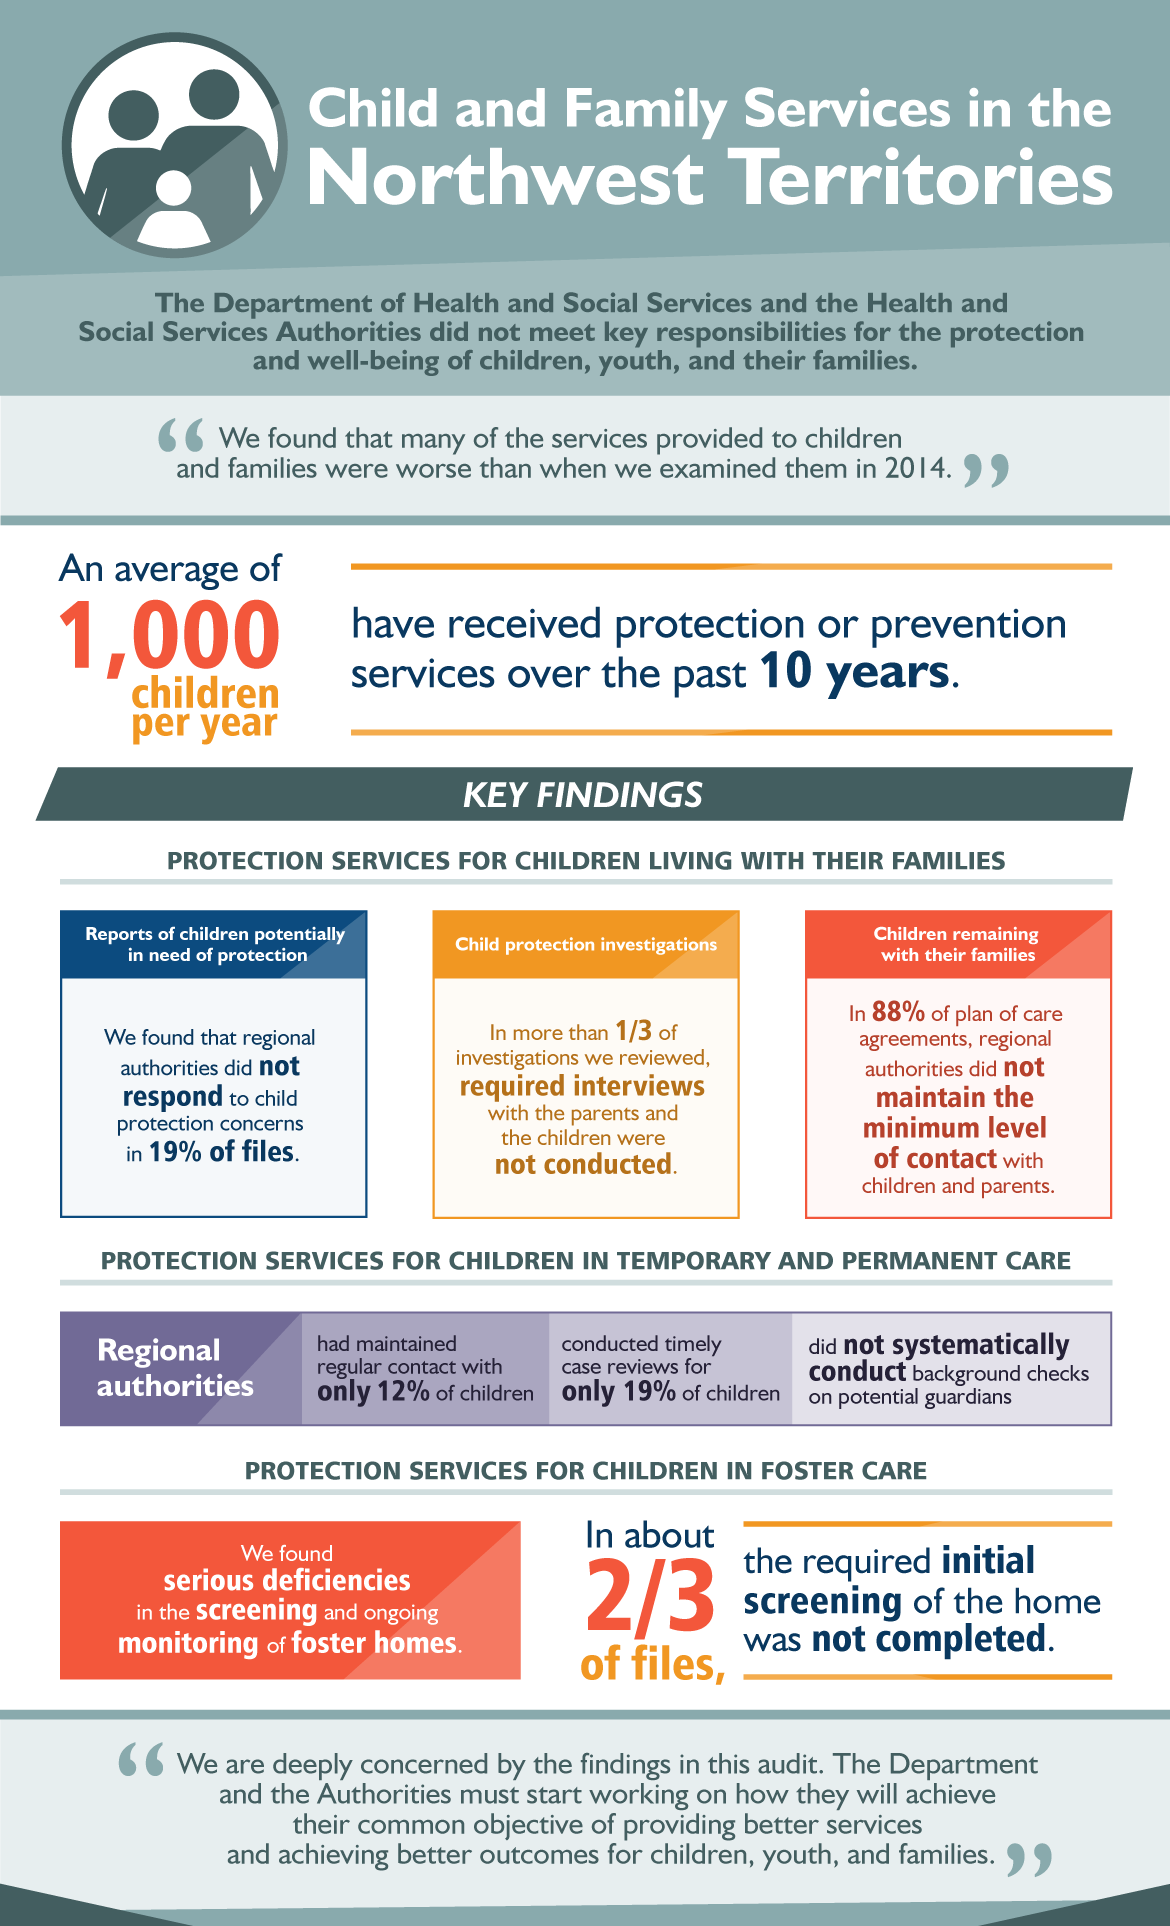 This infographic presents findings from the audit of Child and Family Services in the Northwest Territories